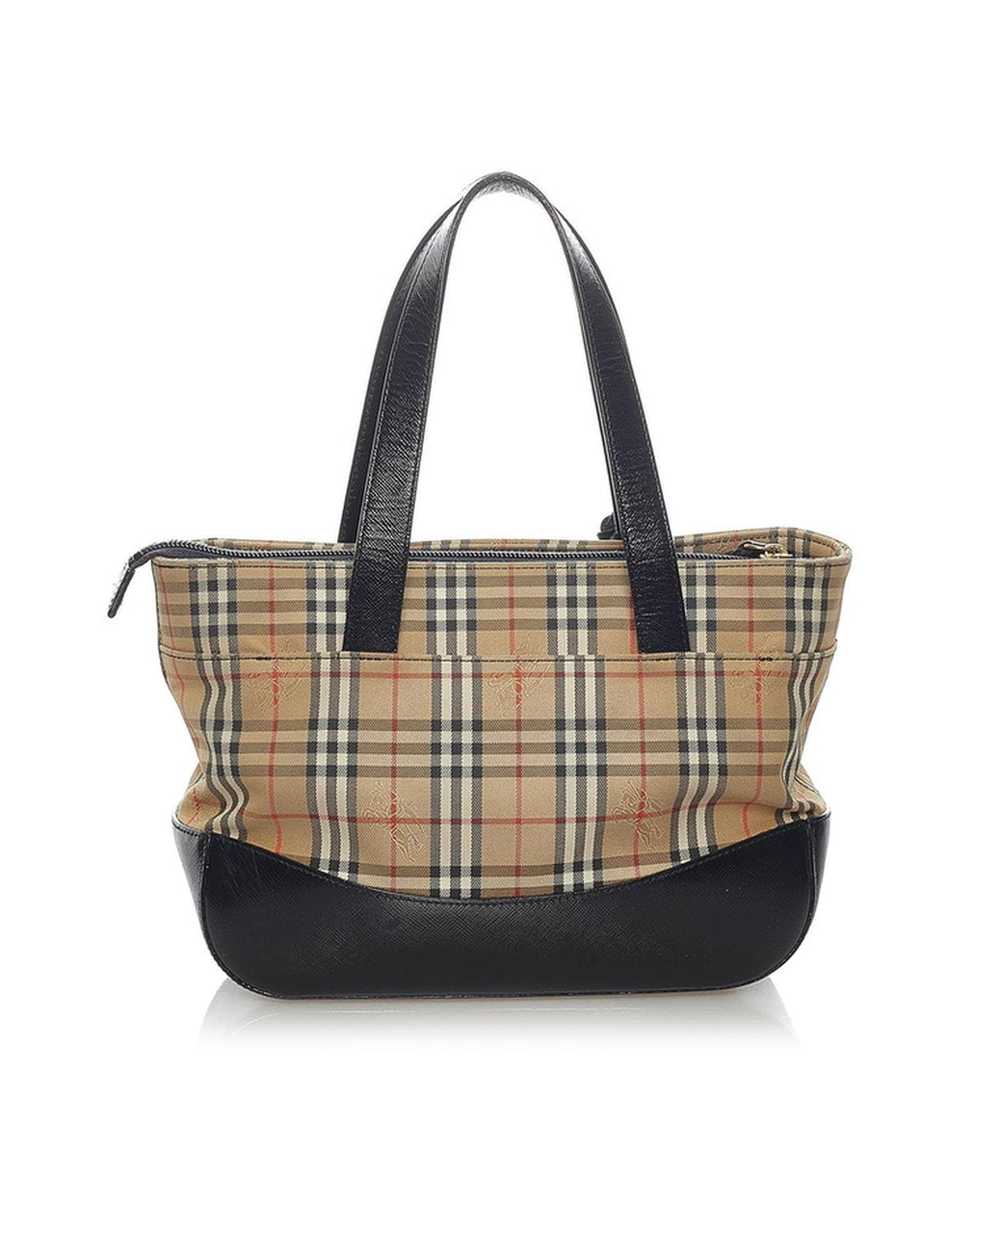 Burberry Classic Check Handbag in Brown - image 3